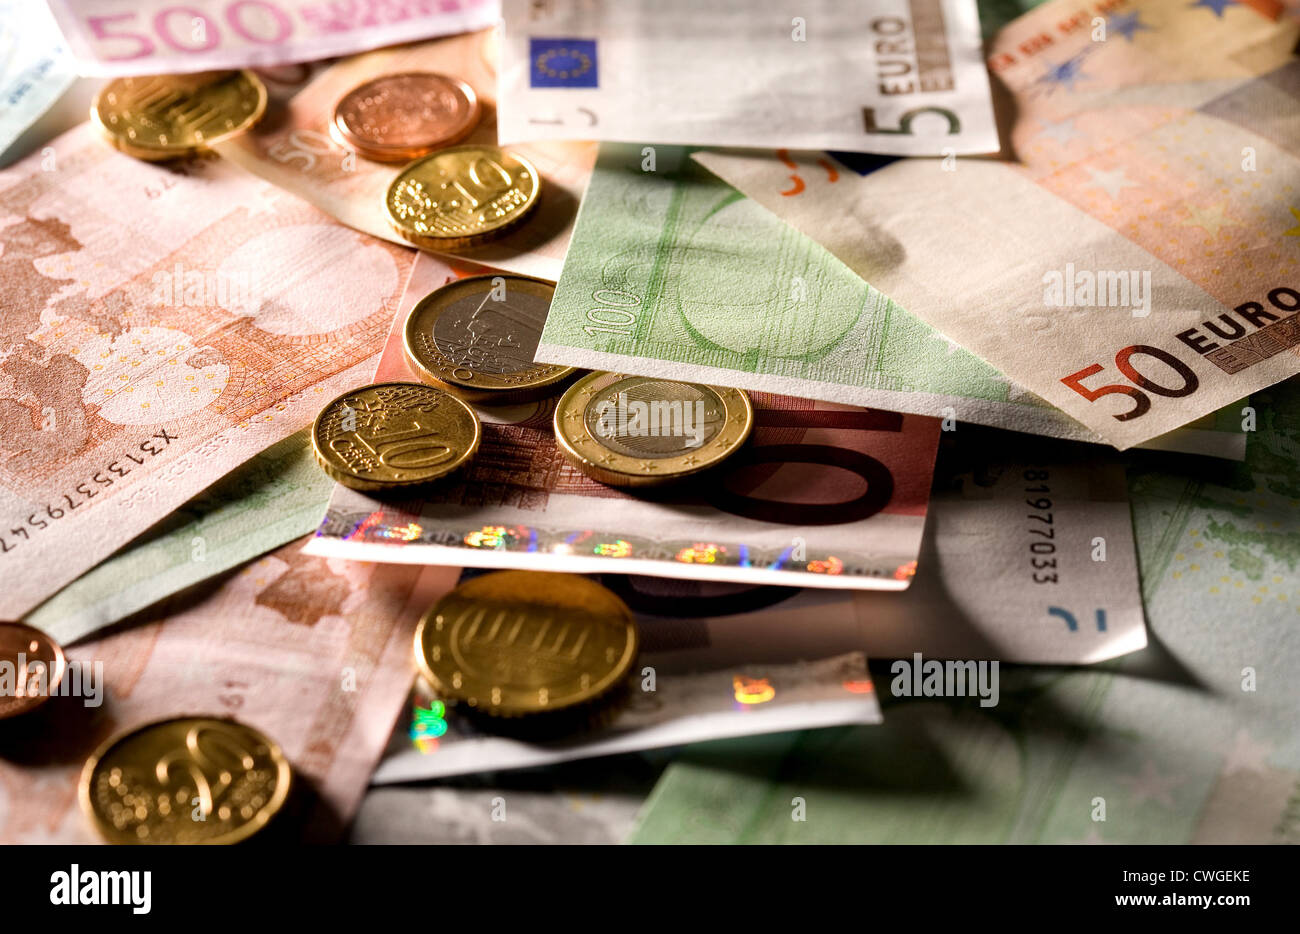 Euromuenzen on disarranged euro notes in various denominations Stock ...